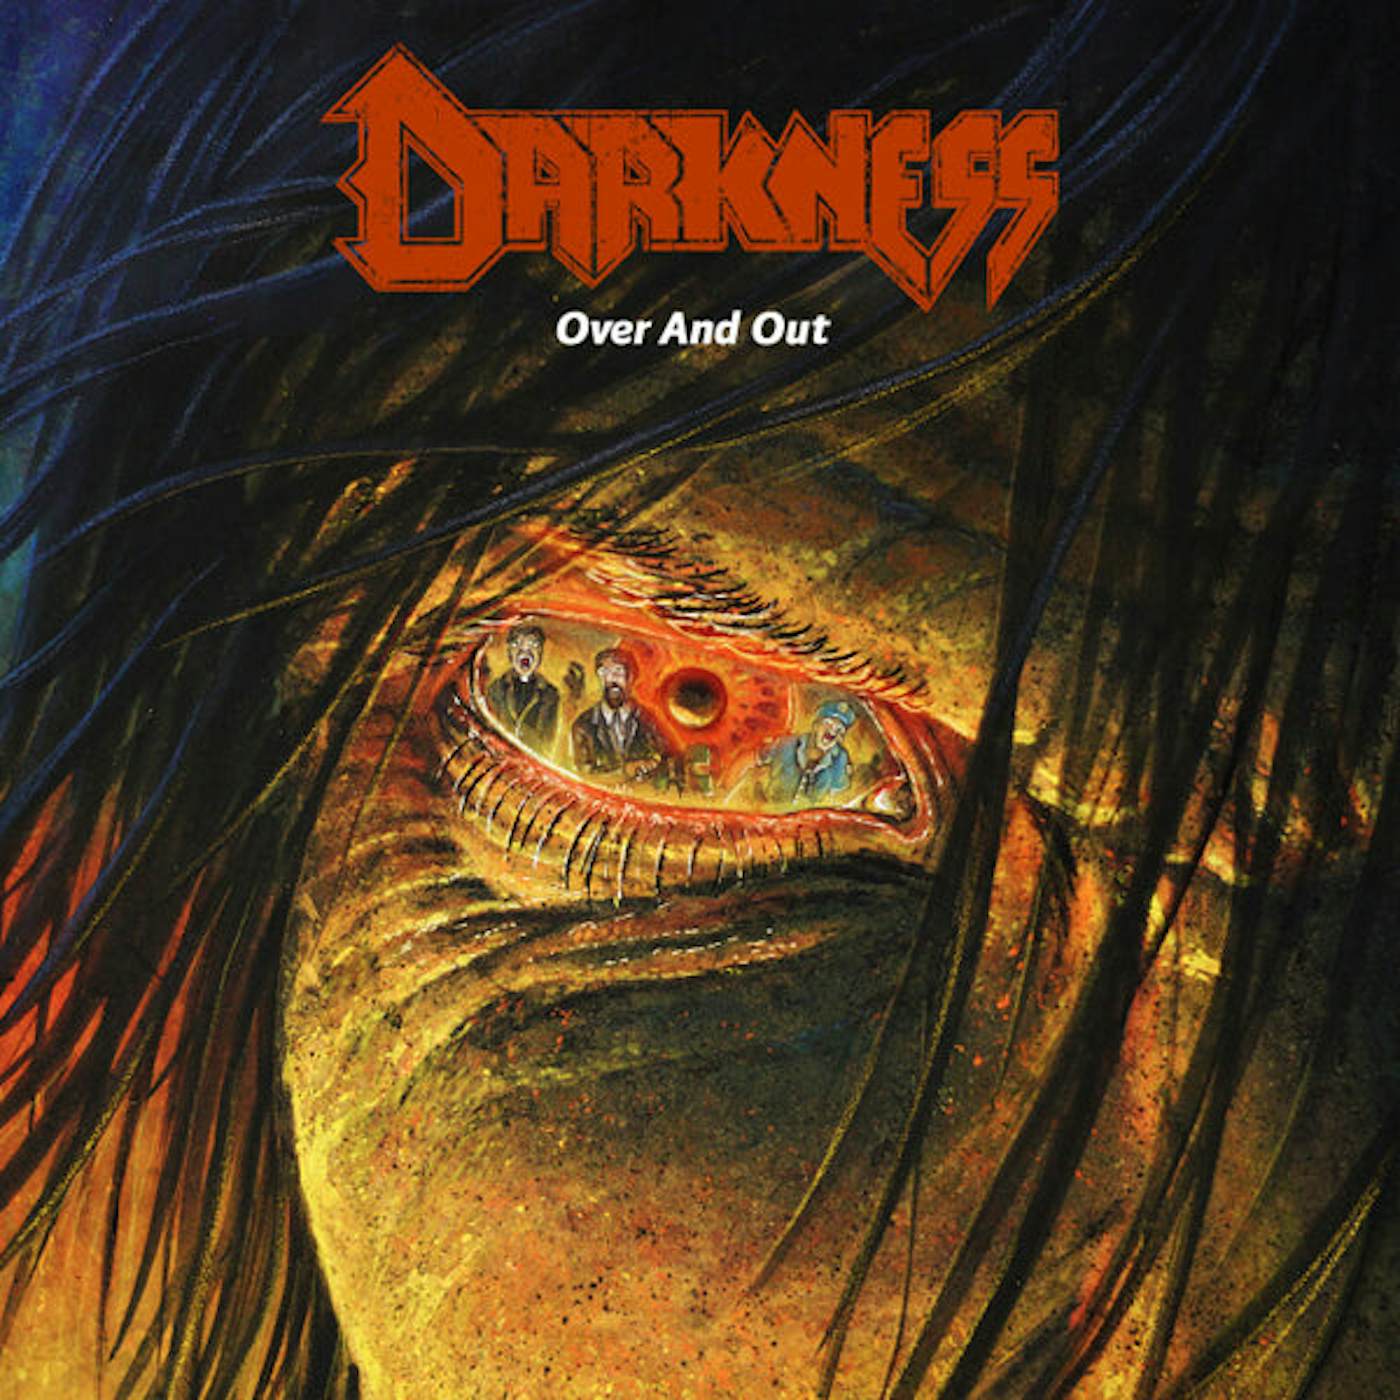 The Darkness LP - Over And Out (Vinyl)